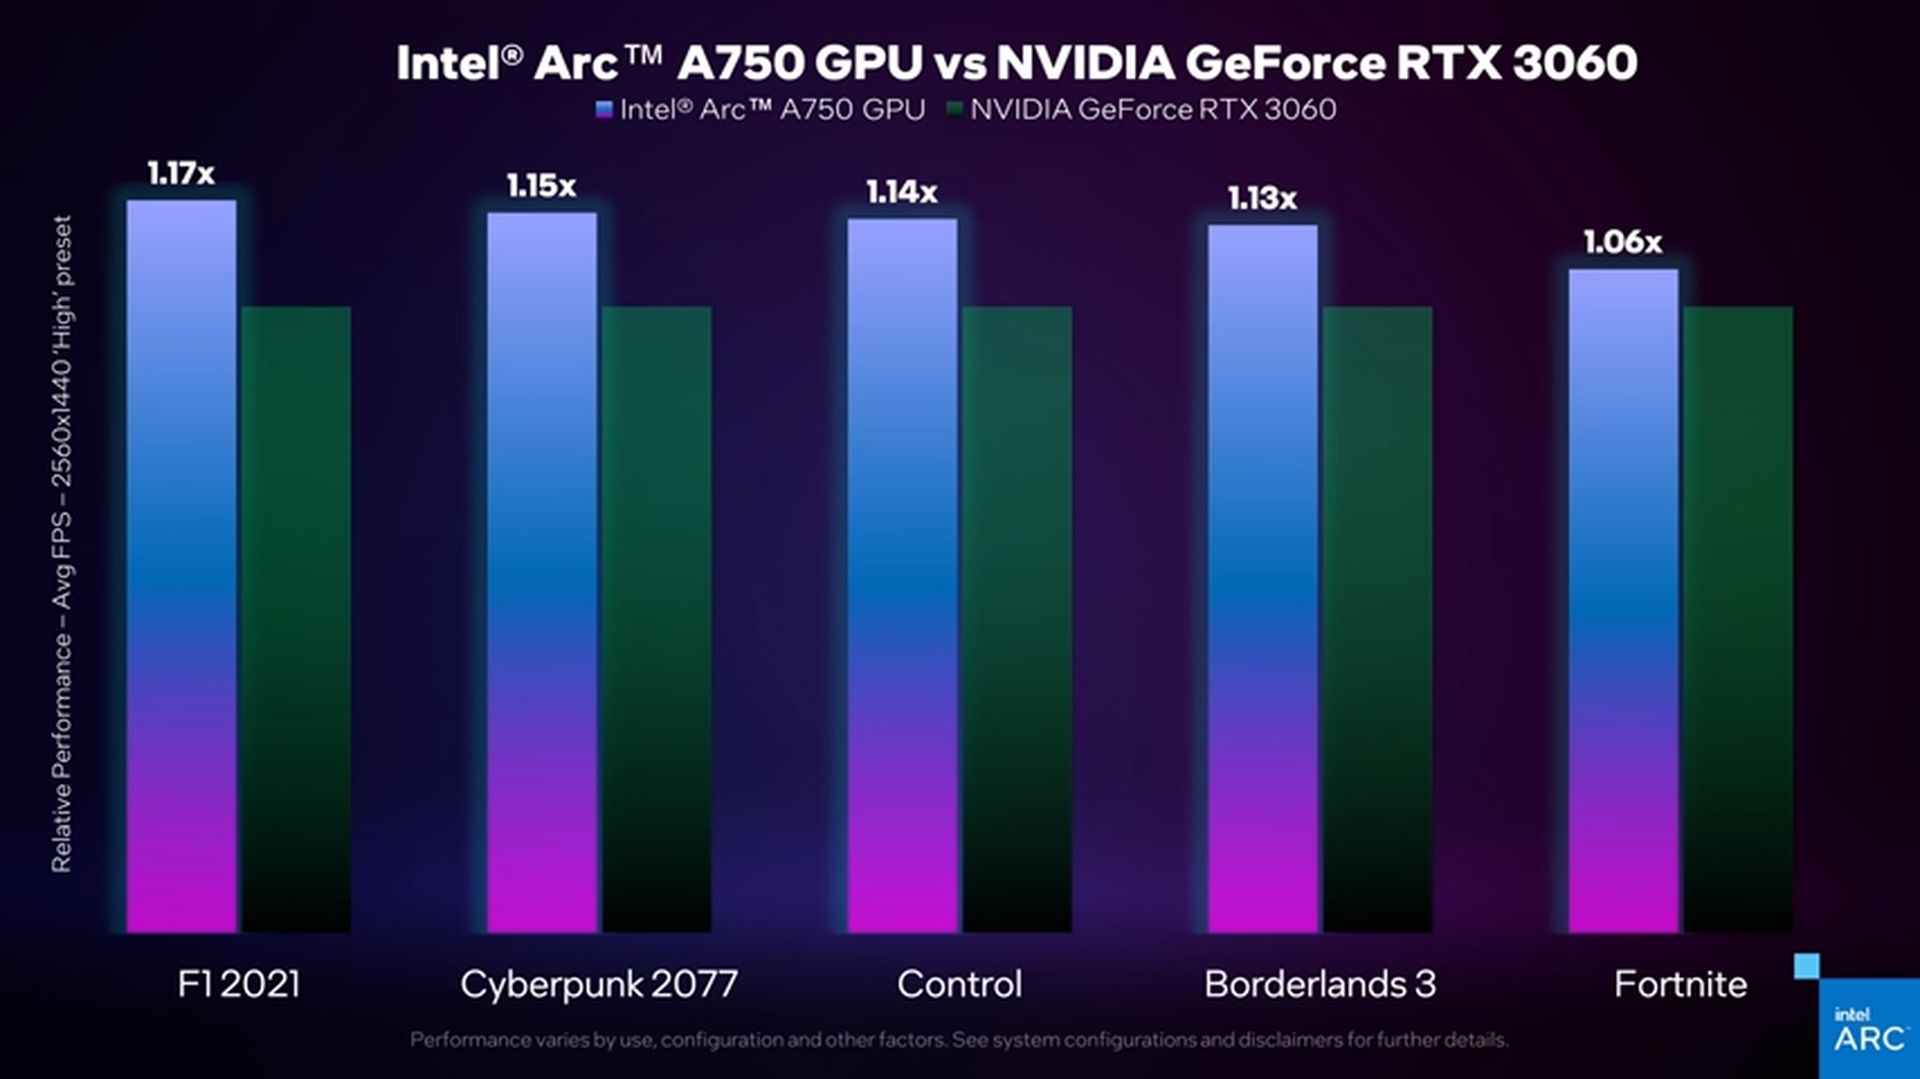 Intel Arc A750 outperforms GeForce RTX 3060 in AAA games